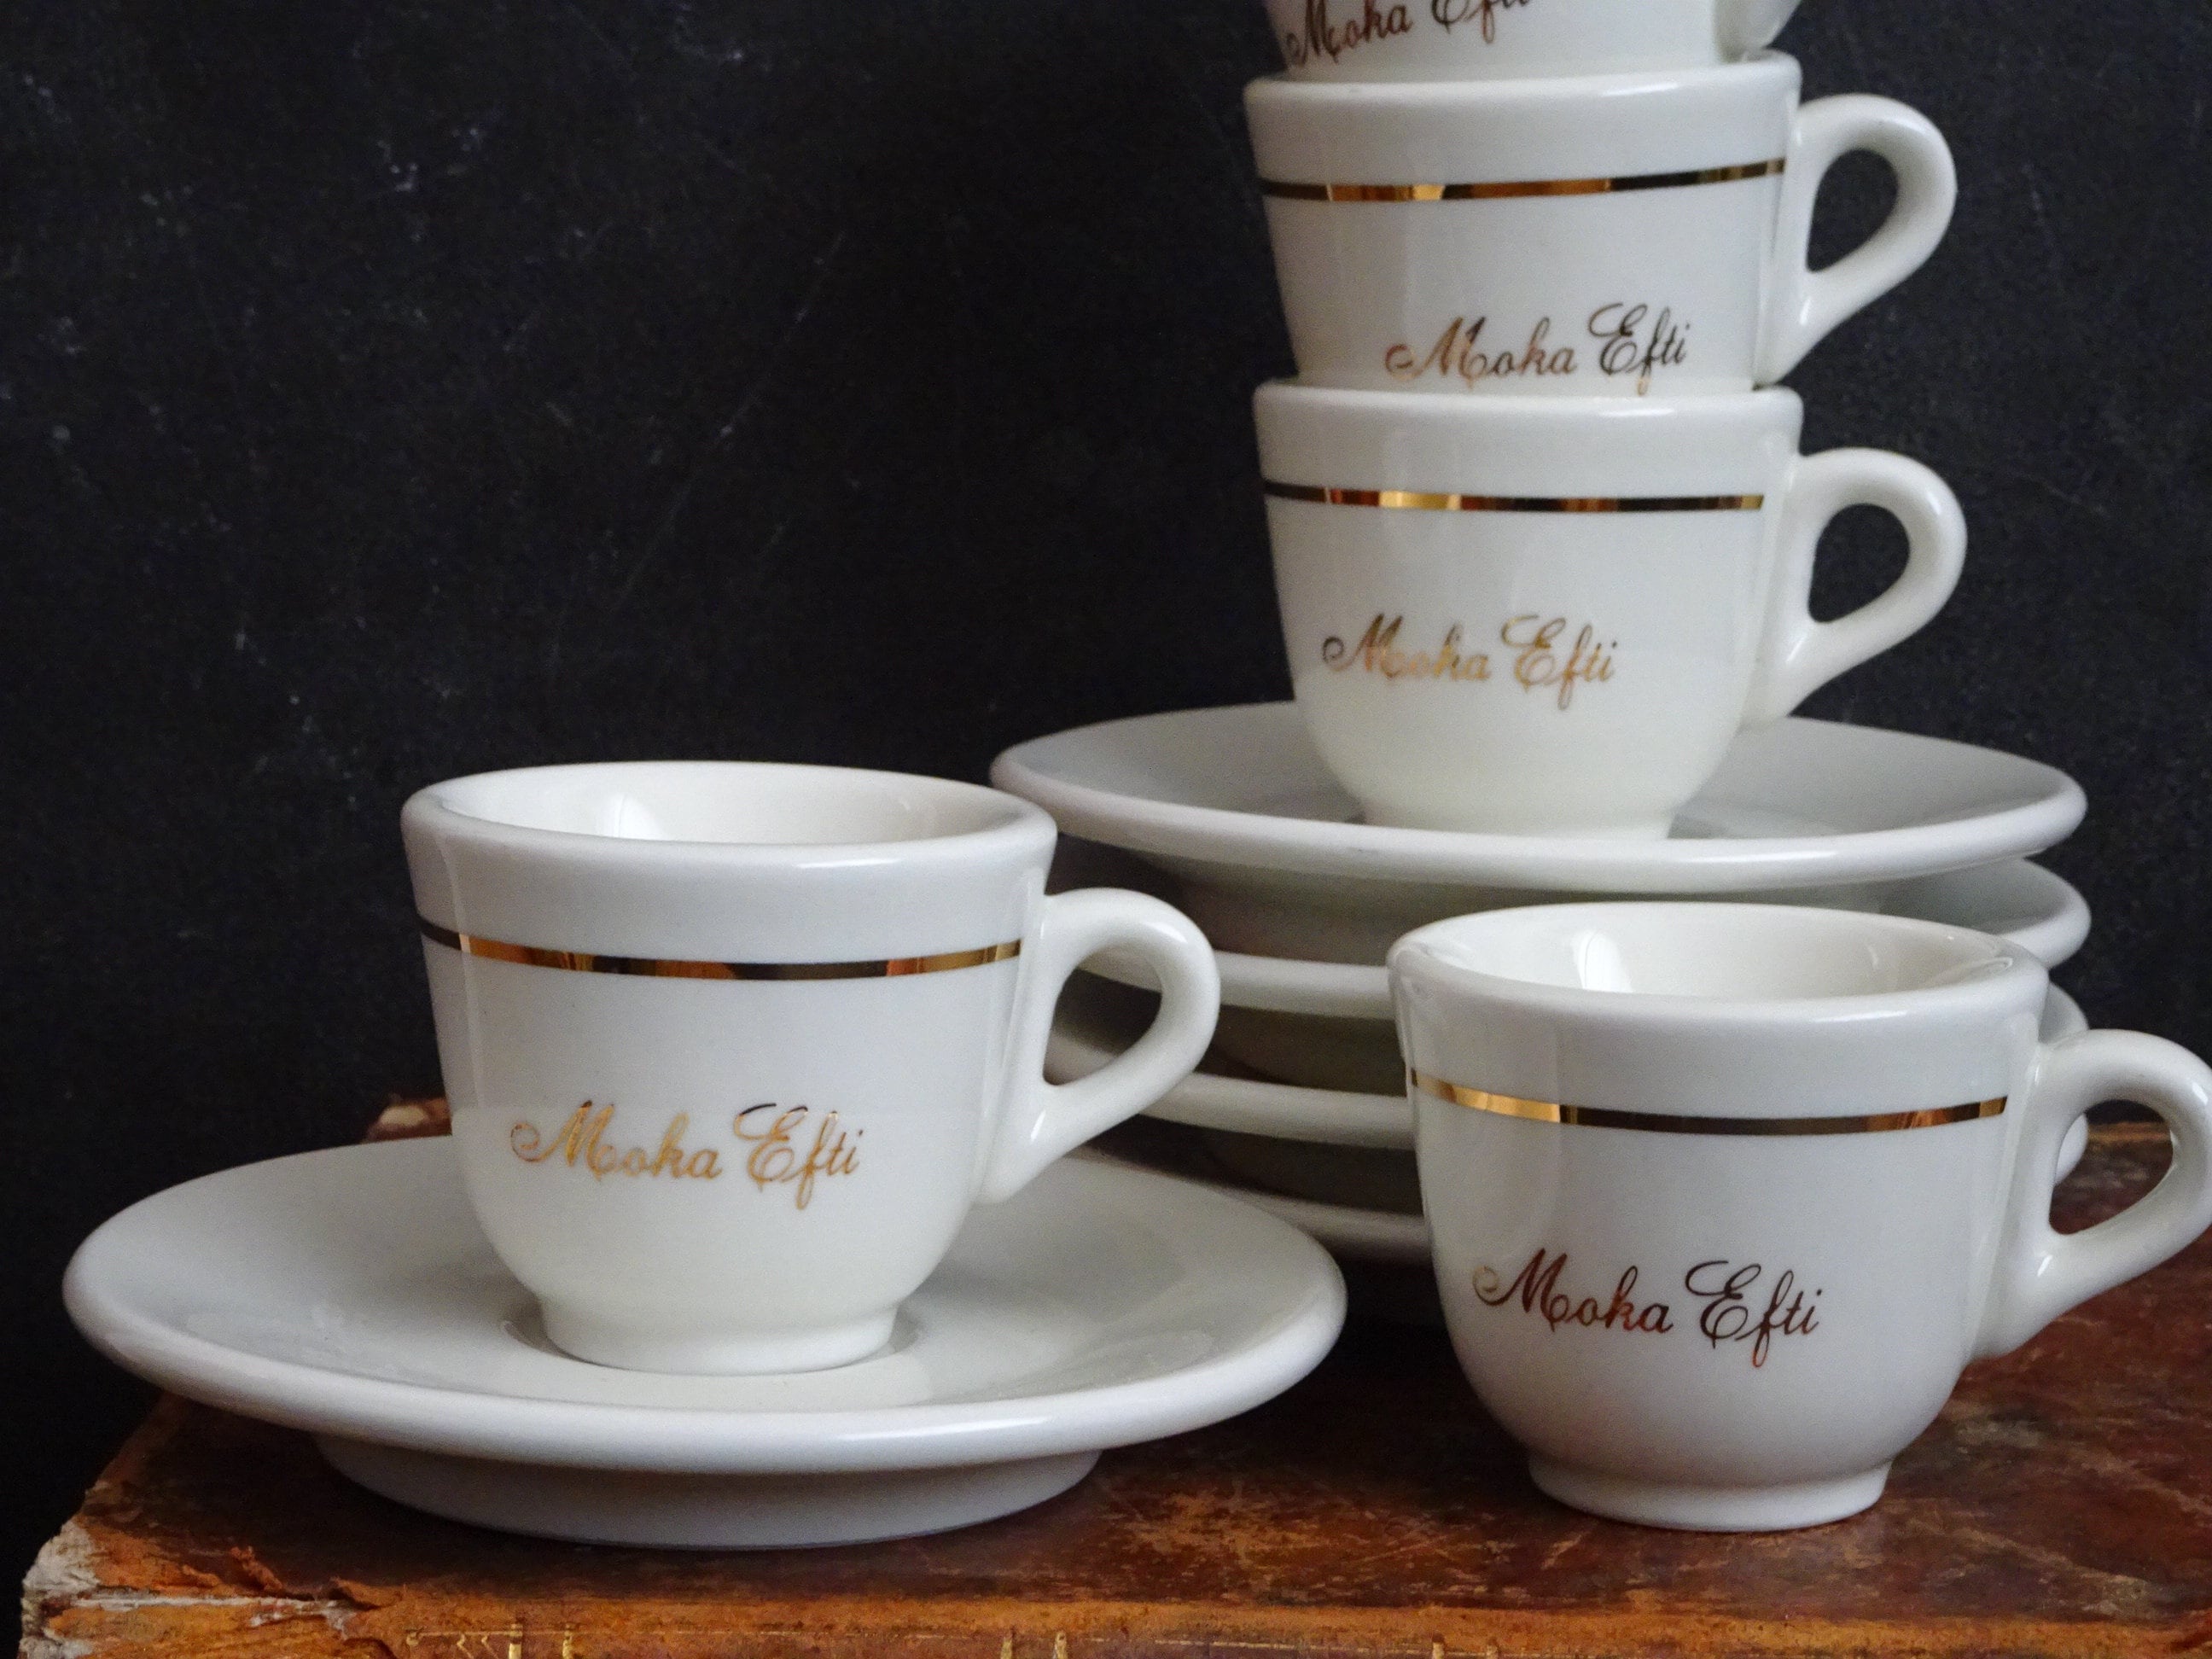 Handmade Italian Espresso Cup and Saucer from The Rosso Collection